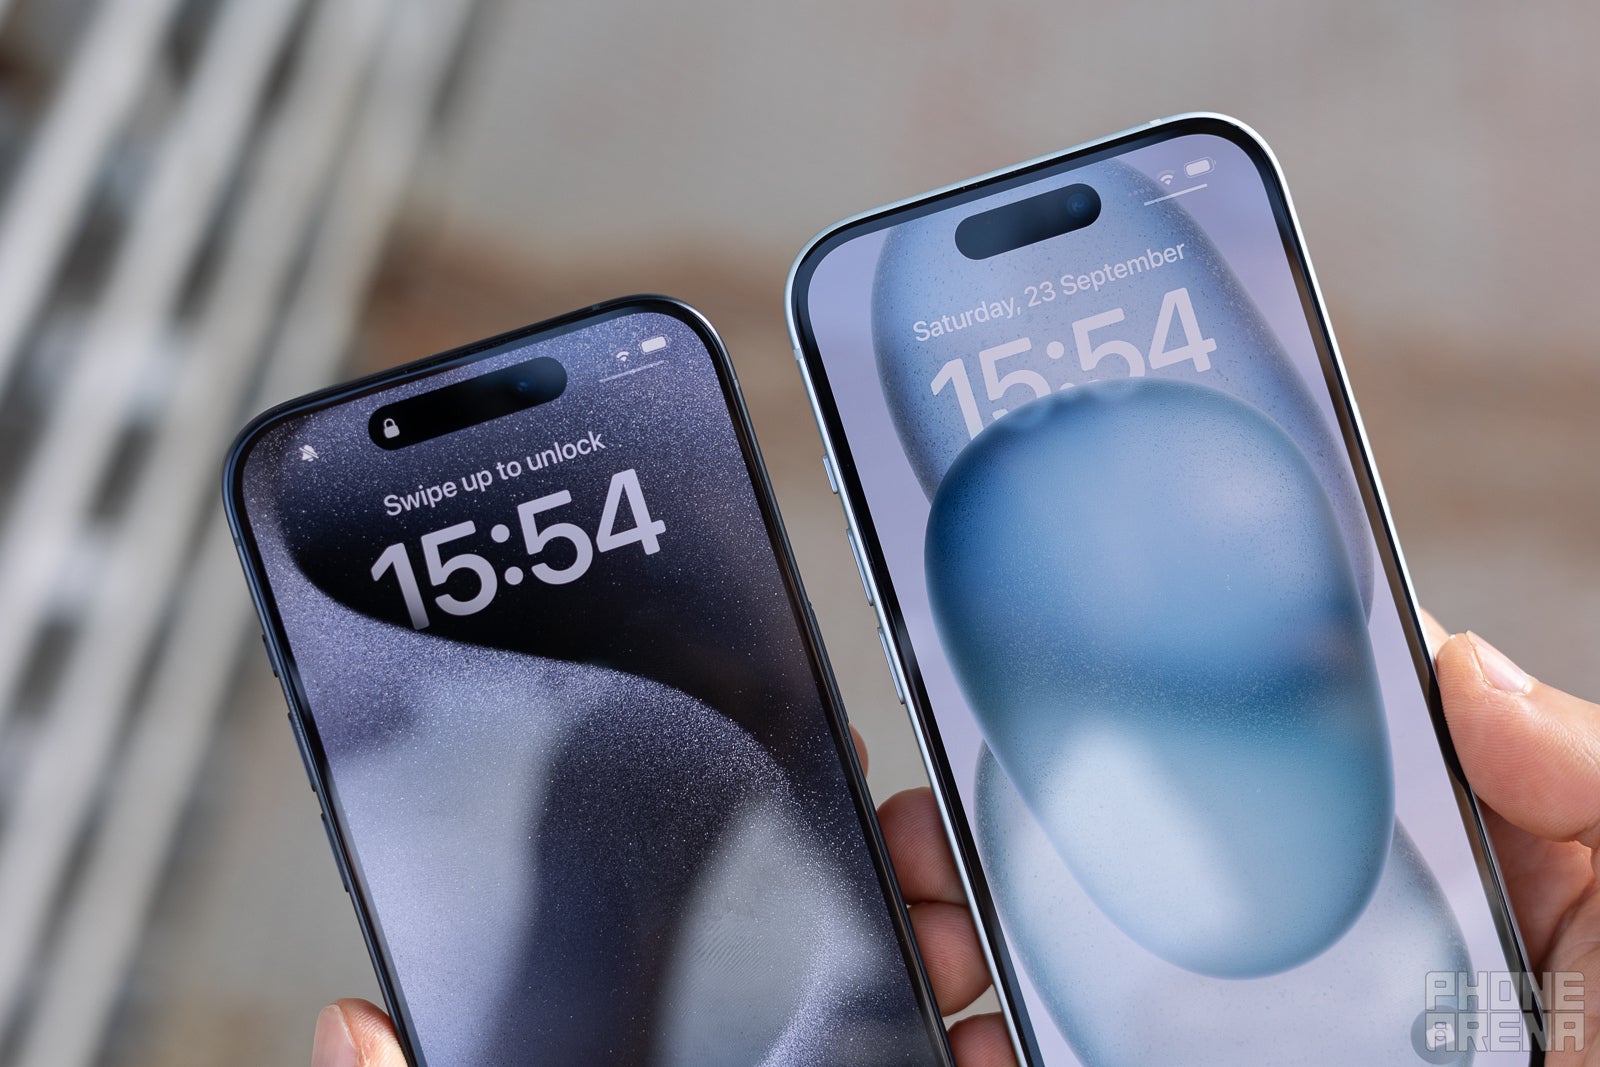 (Image Credit - PhoneArena) The Pro model has slimmer bezels - iPhone 15 Pro vs iPhone 15: which one should you go for?